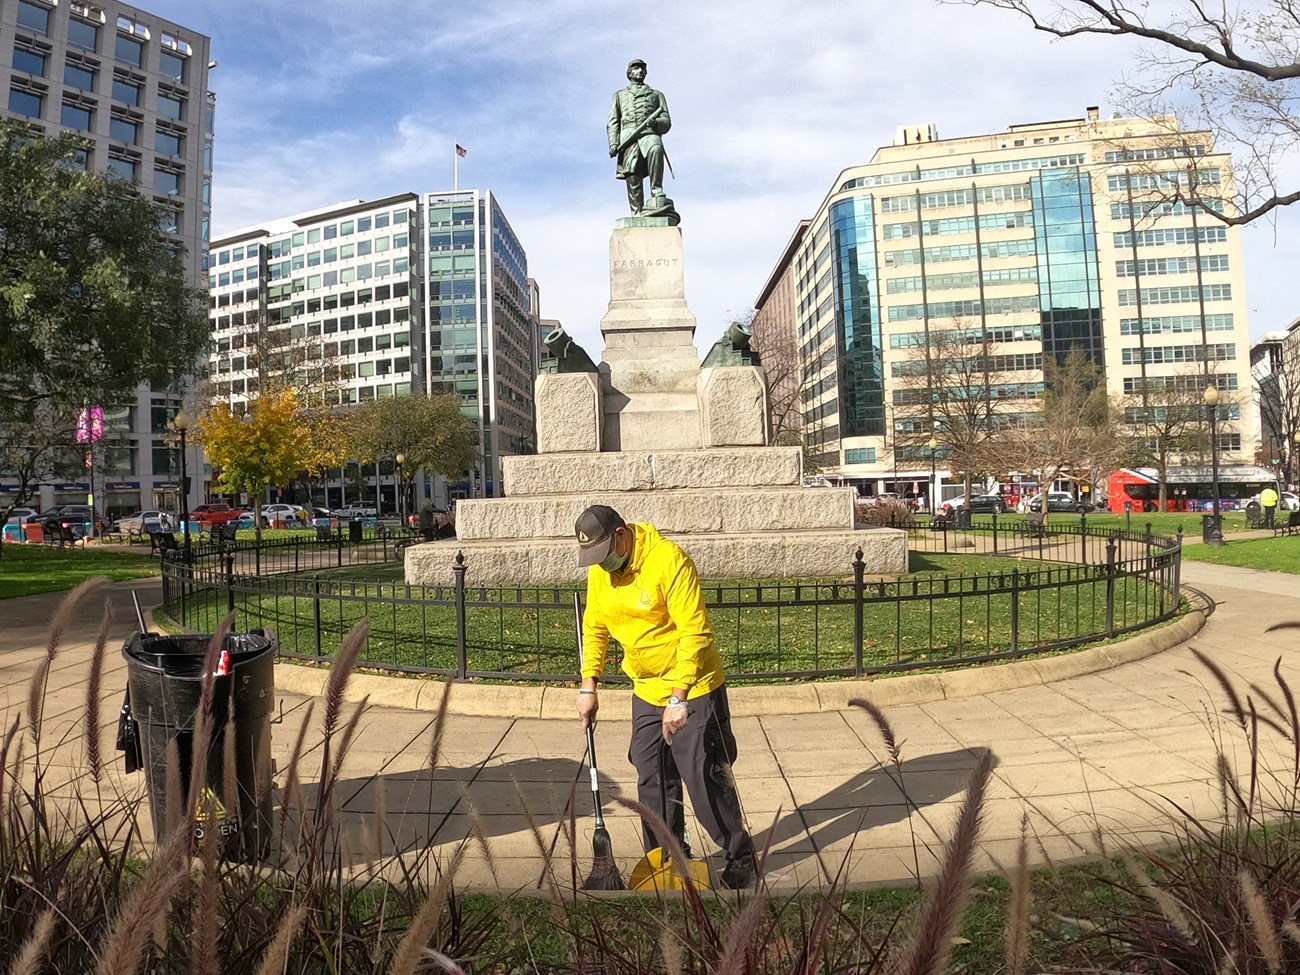 A man in yellow sweeps trash with a statue in the background.